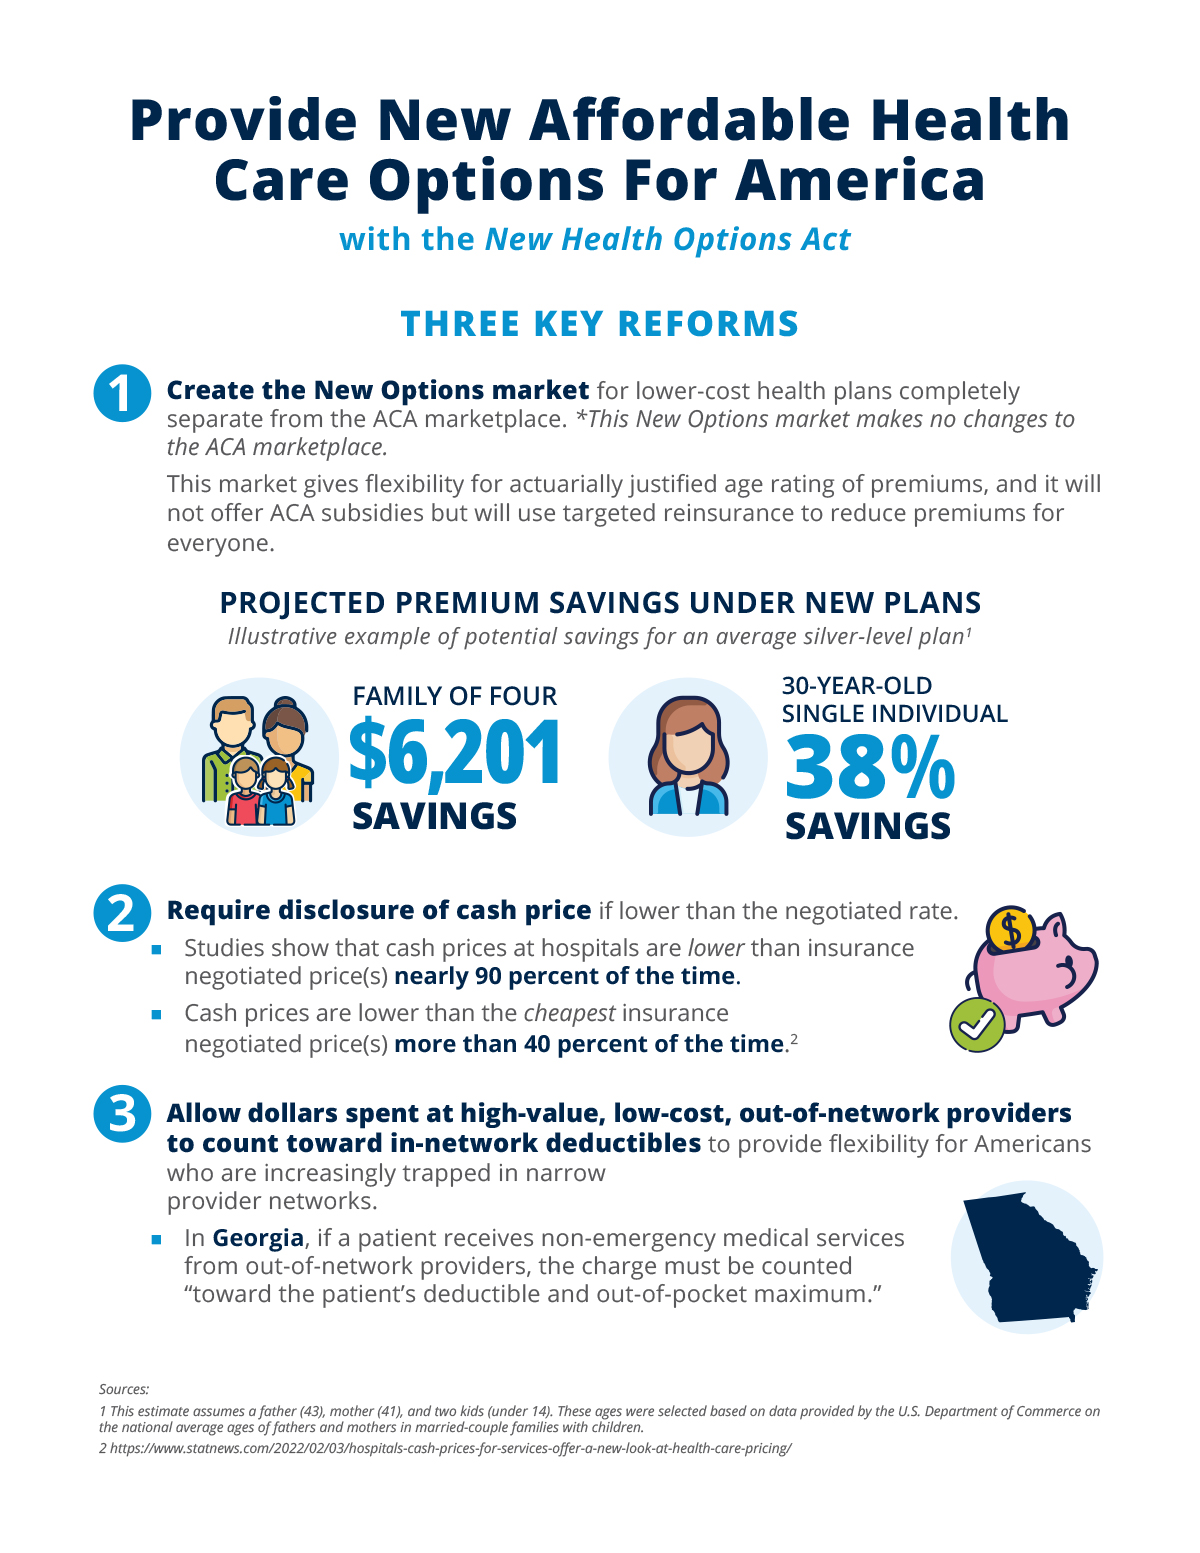 Provide New Affordable Health Care Options For America